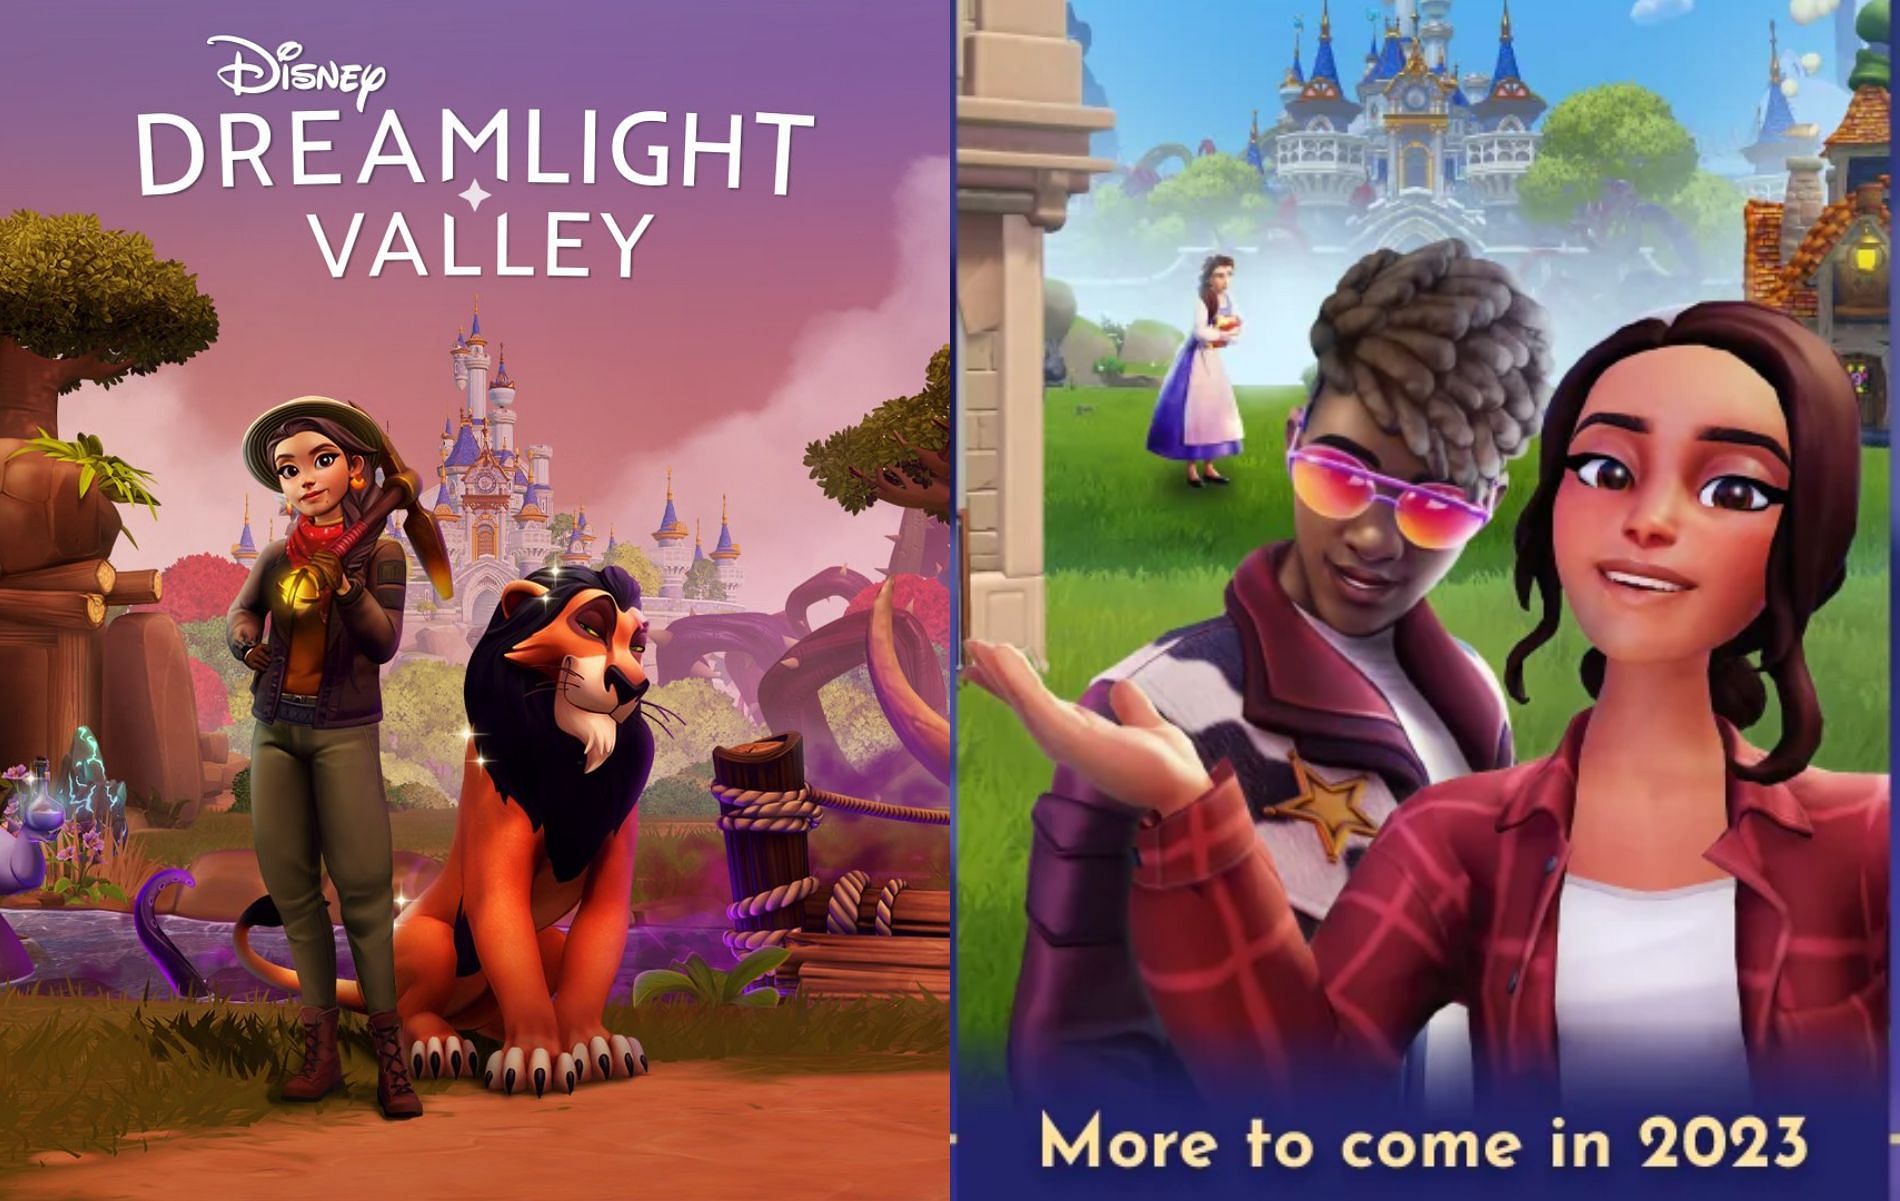 Disney Dreamlight Valley 2023 roadmap revealed New characters, realms